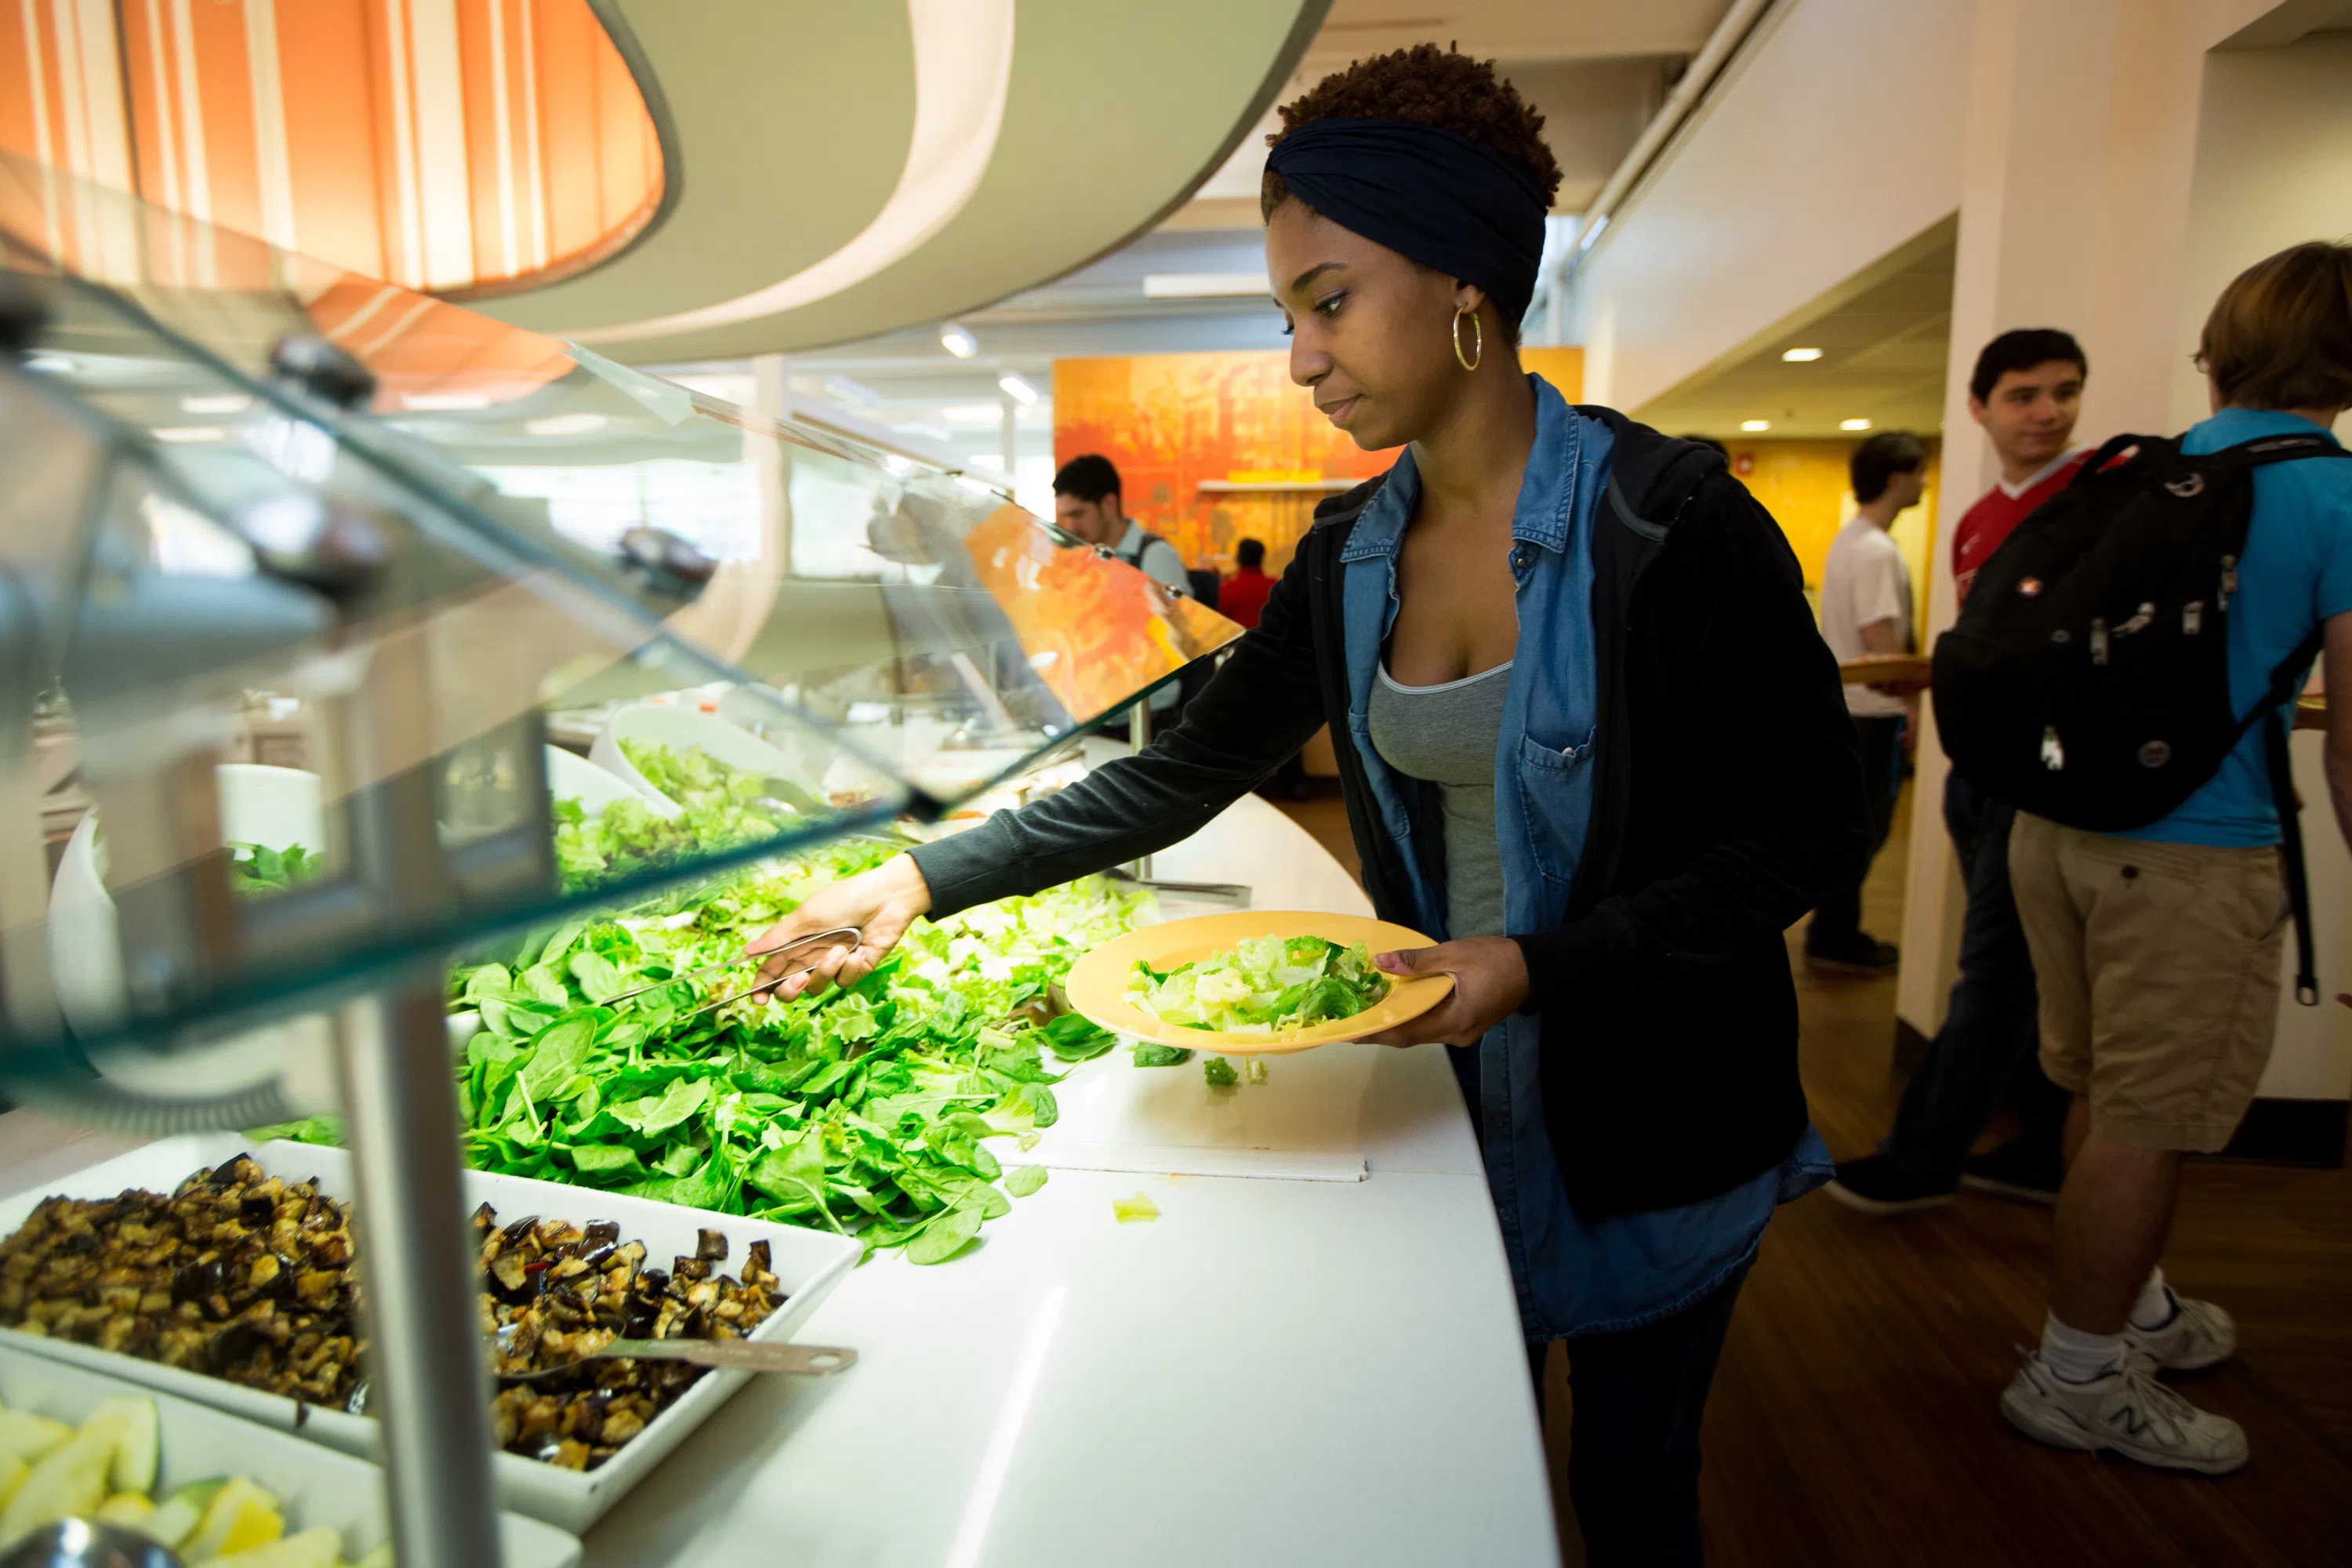 A student using tongs to get lettuce from the salad bar